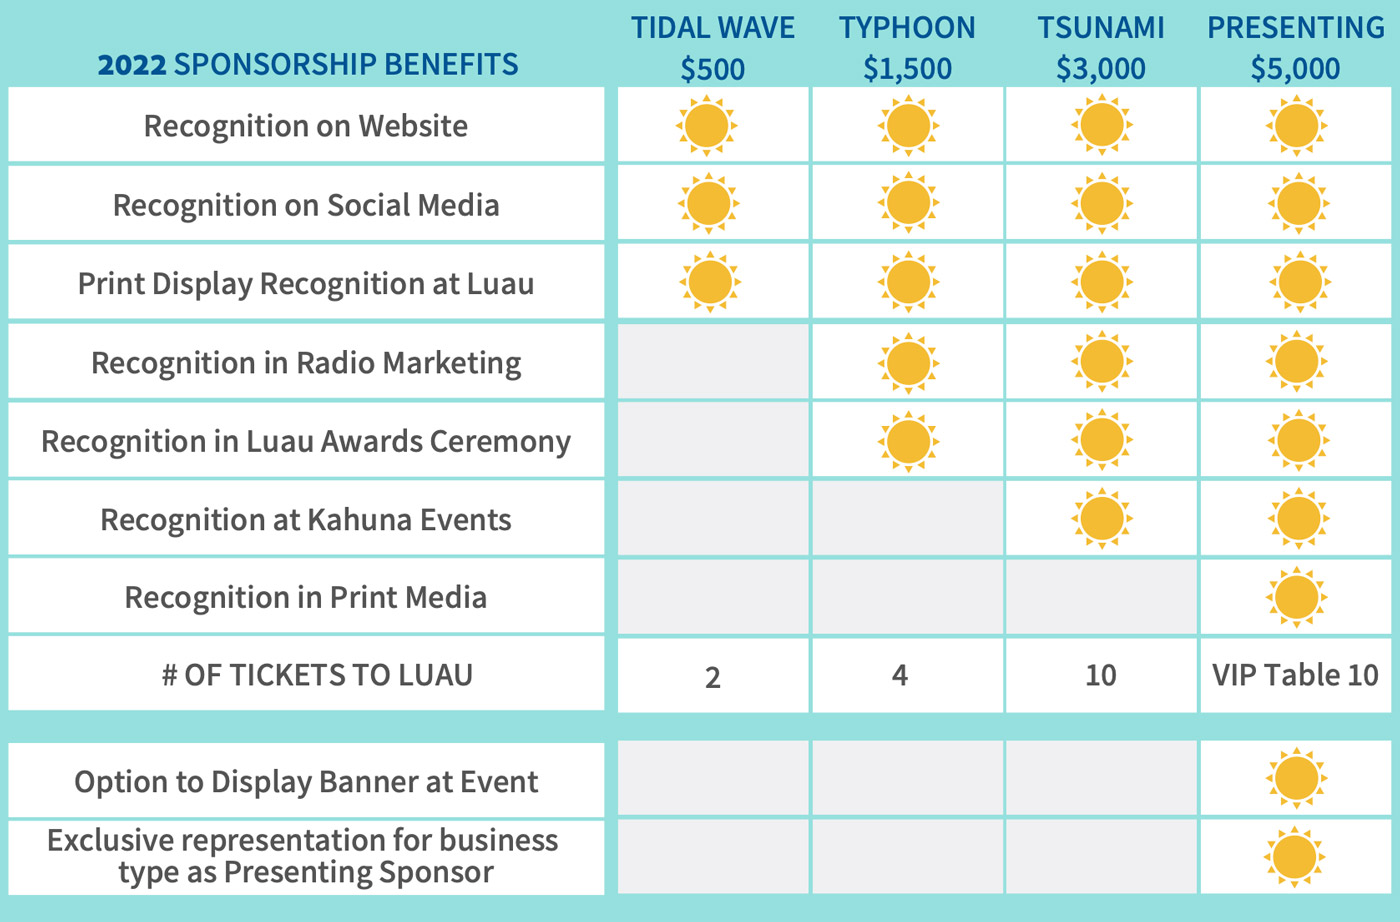 Sponsorship Levels Graphic. Levels are; $500-Tidal Wave, $1,500-Typhoon, $2,500 Tsunami, and $5,000 - Presenting.